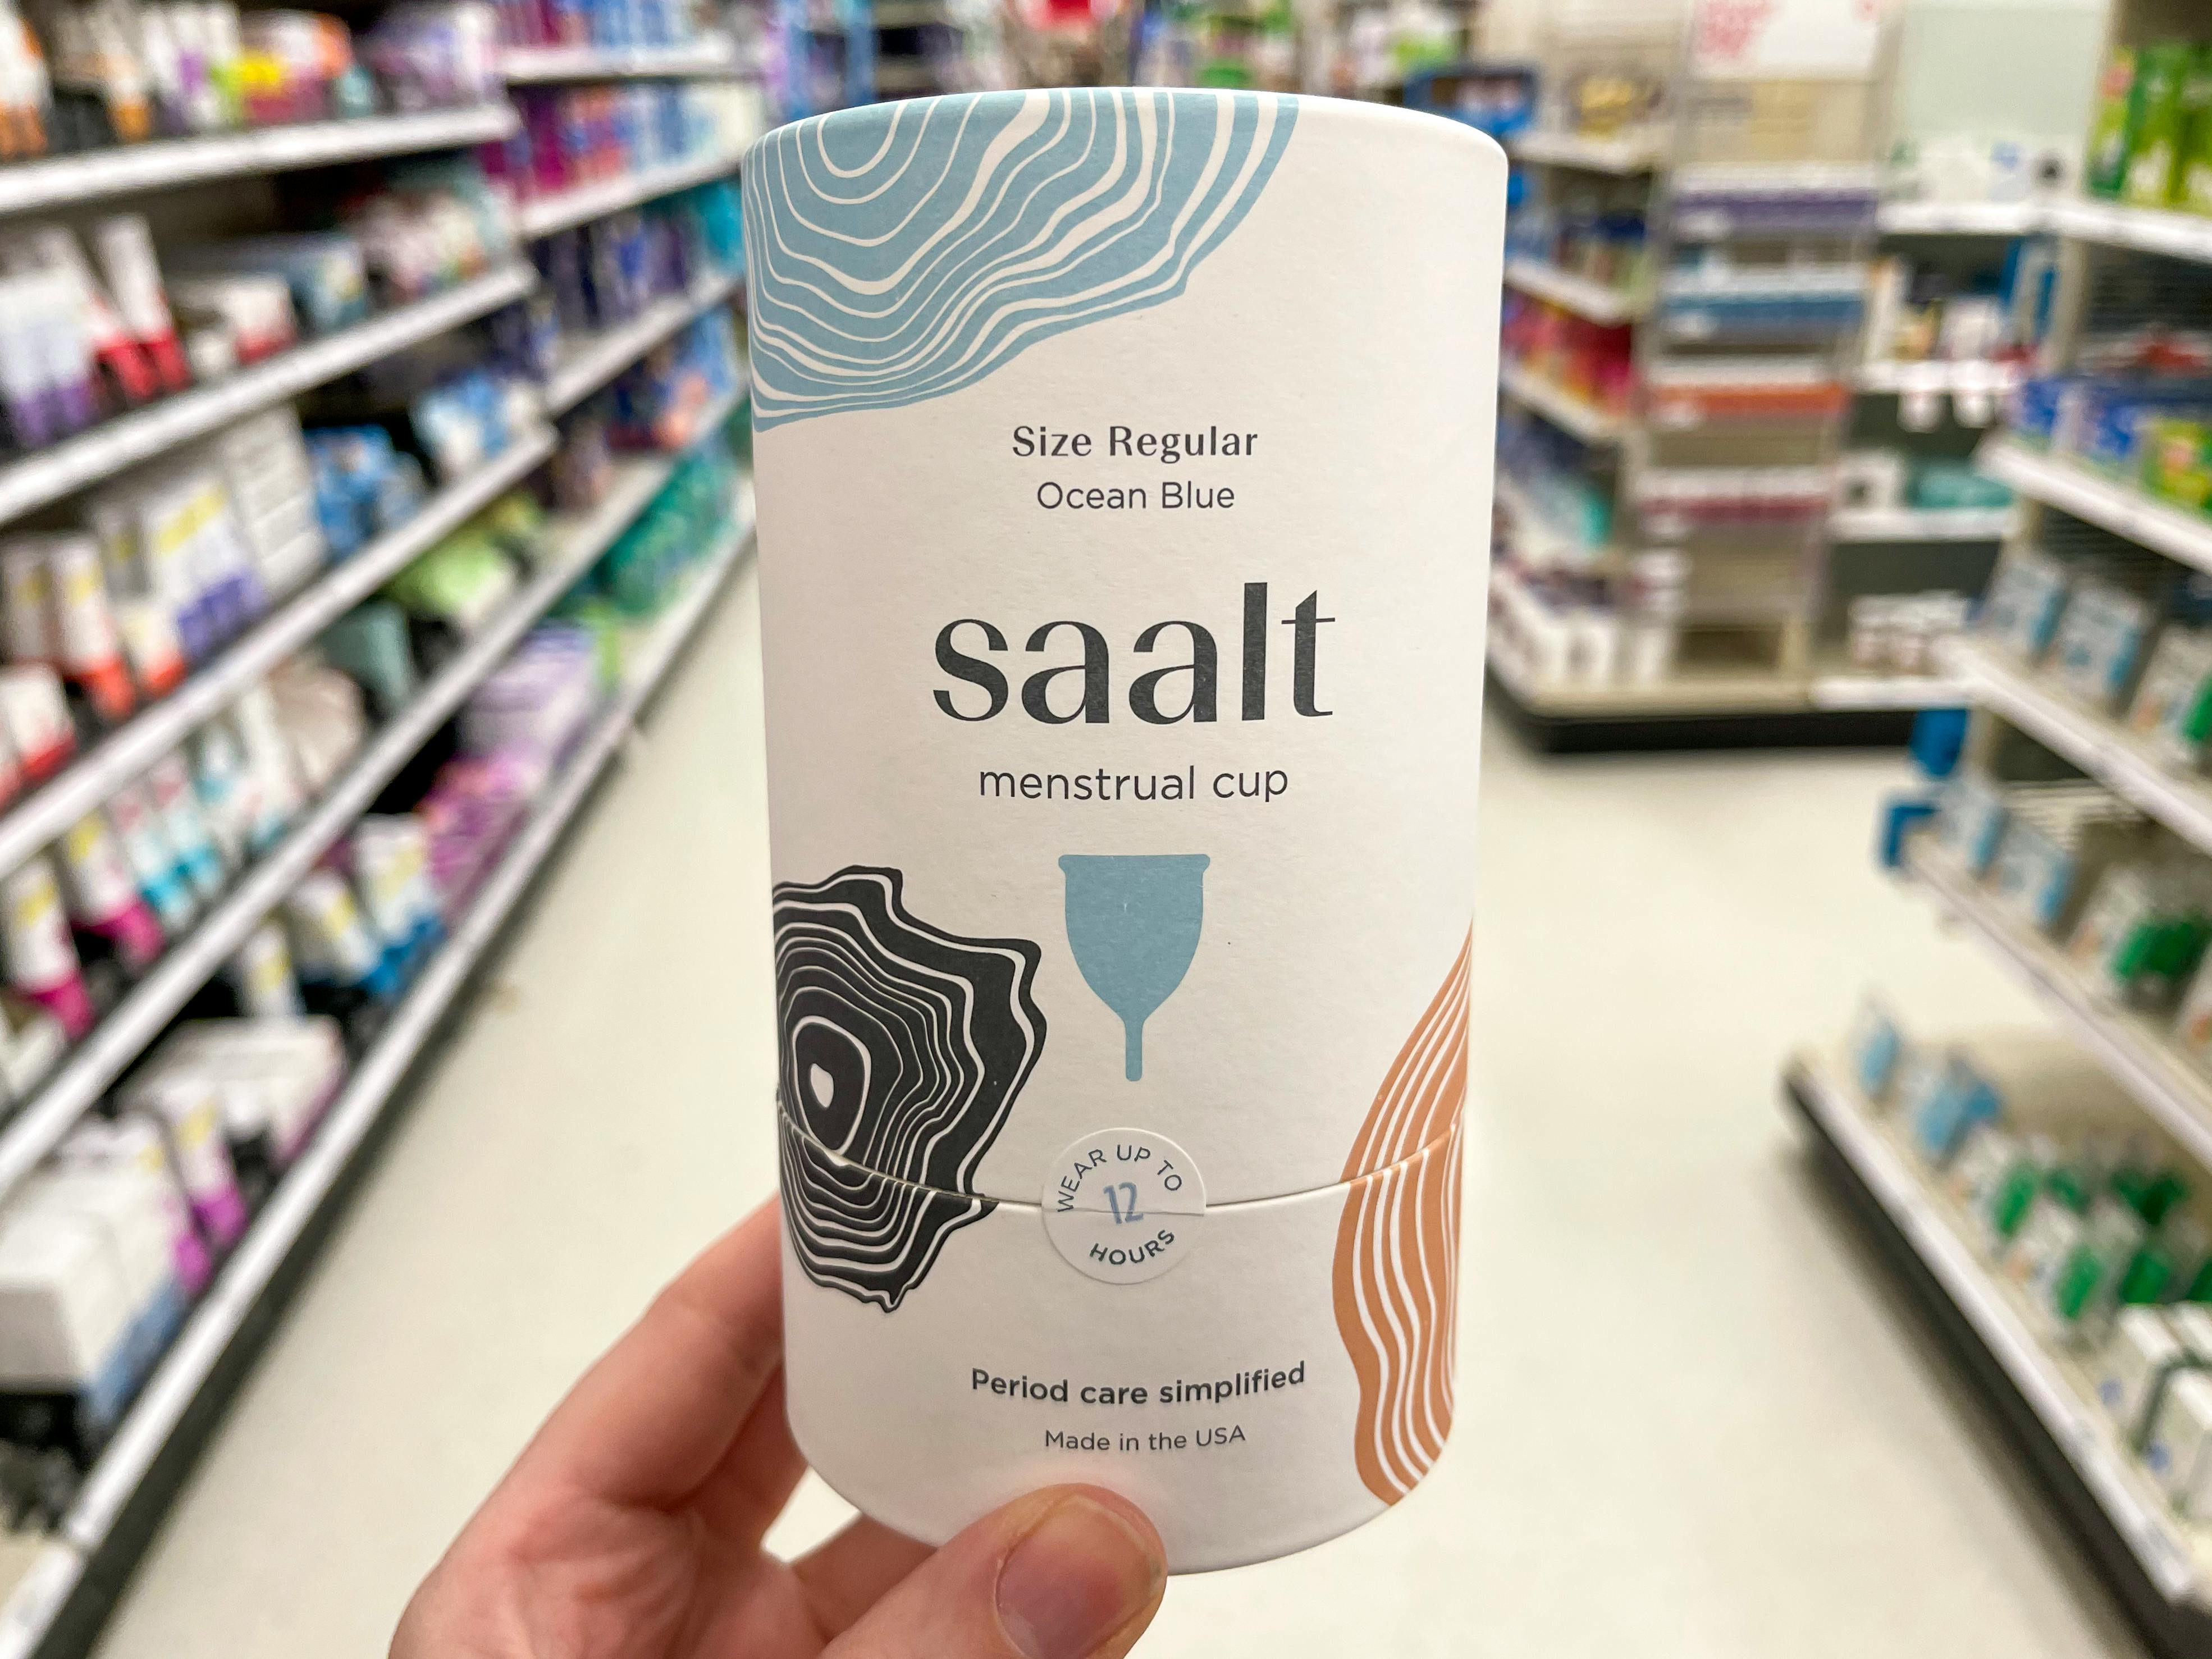 A person holding a box holding a Saalt menstrual cups at Target